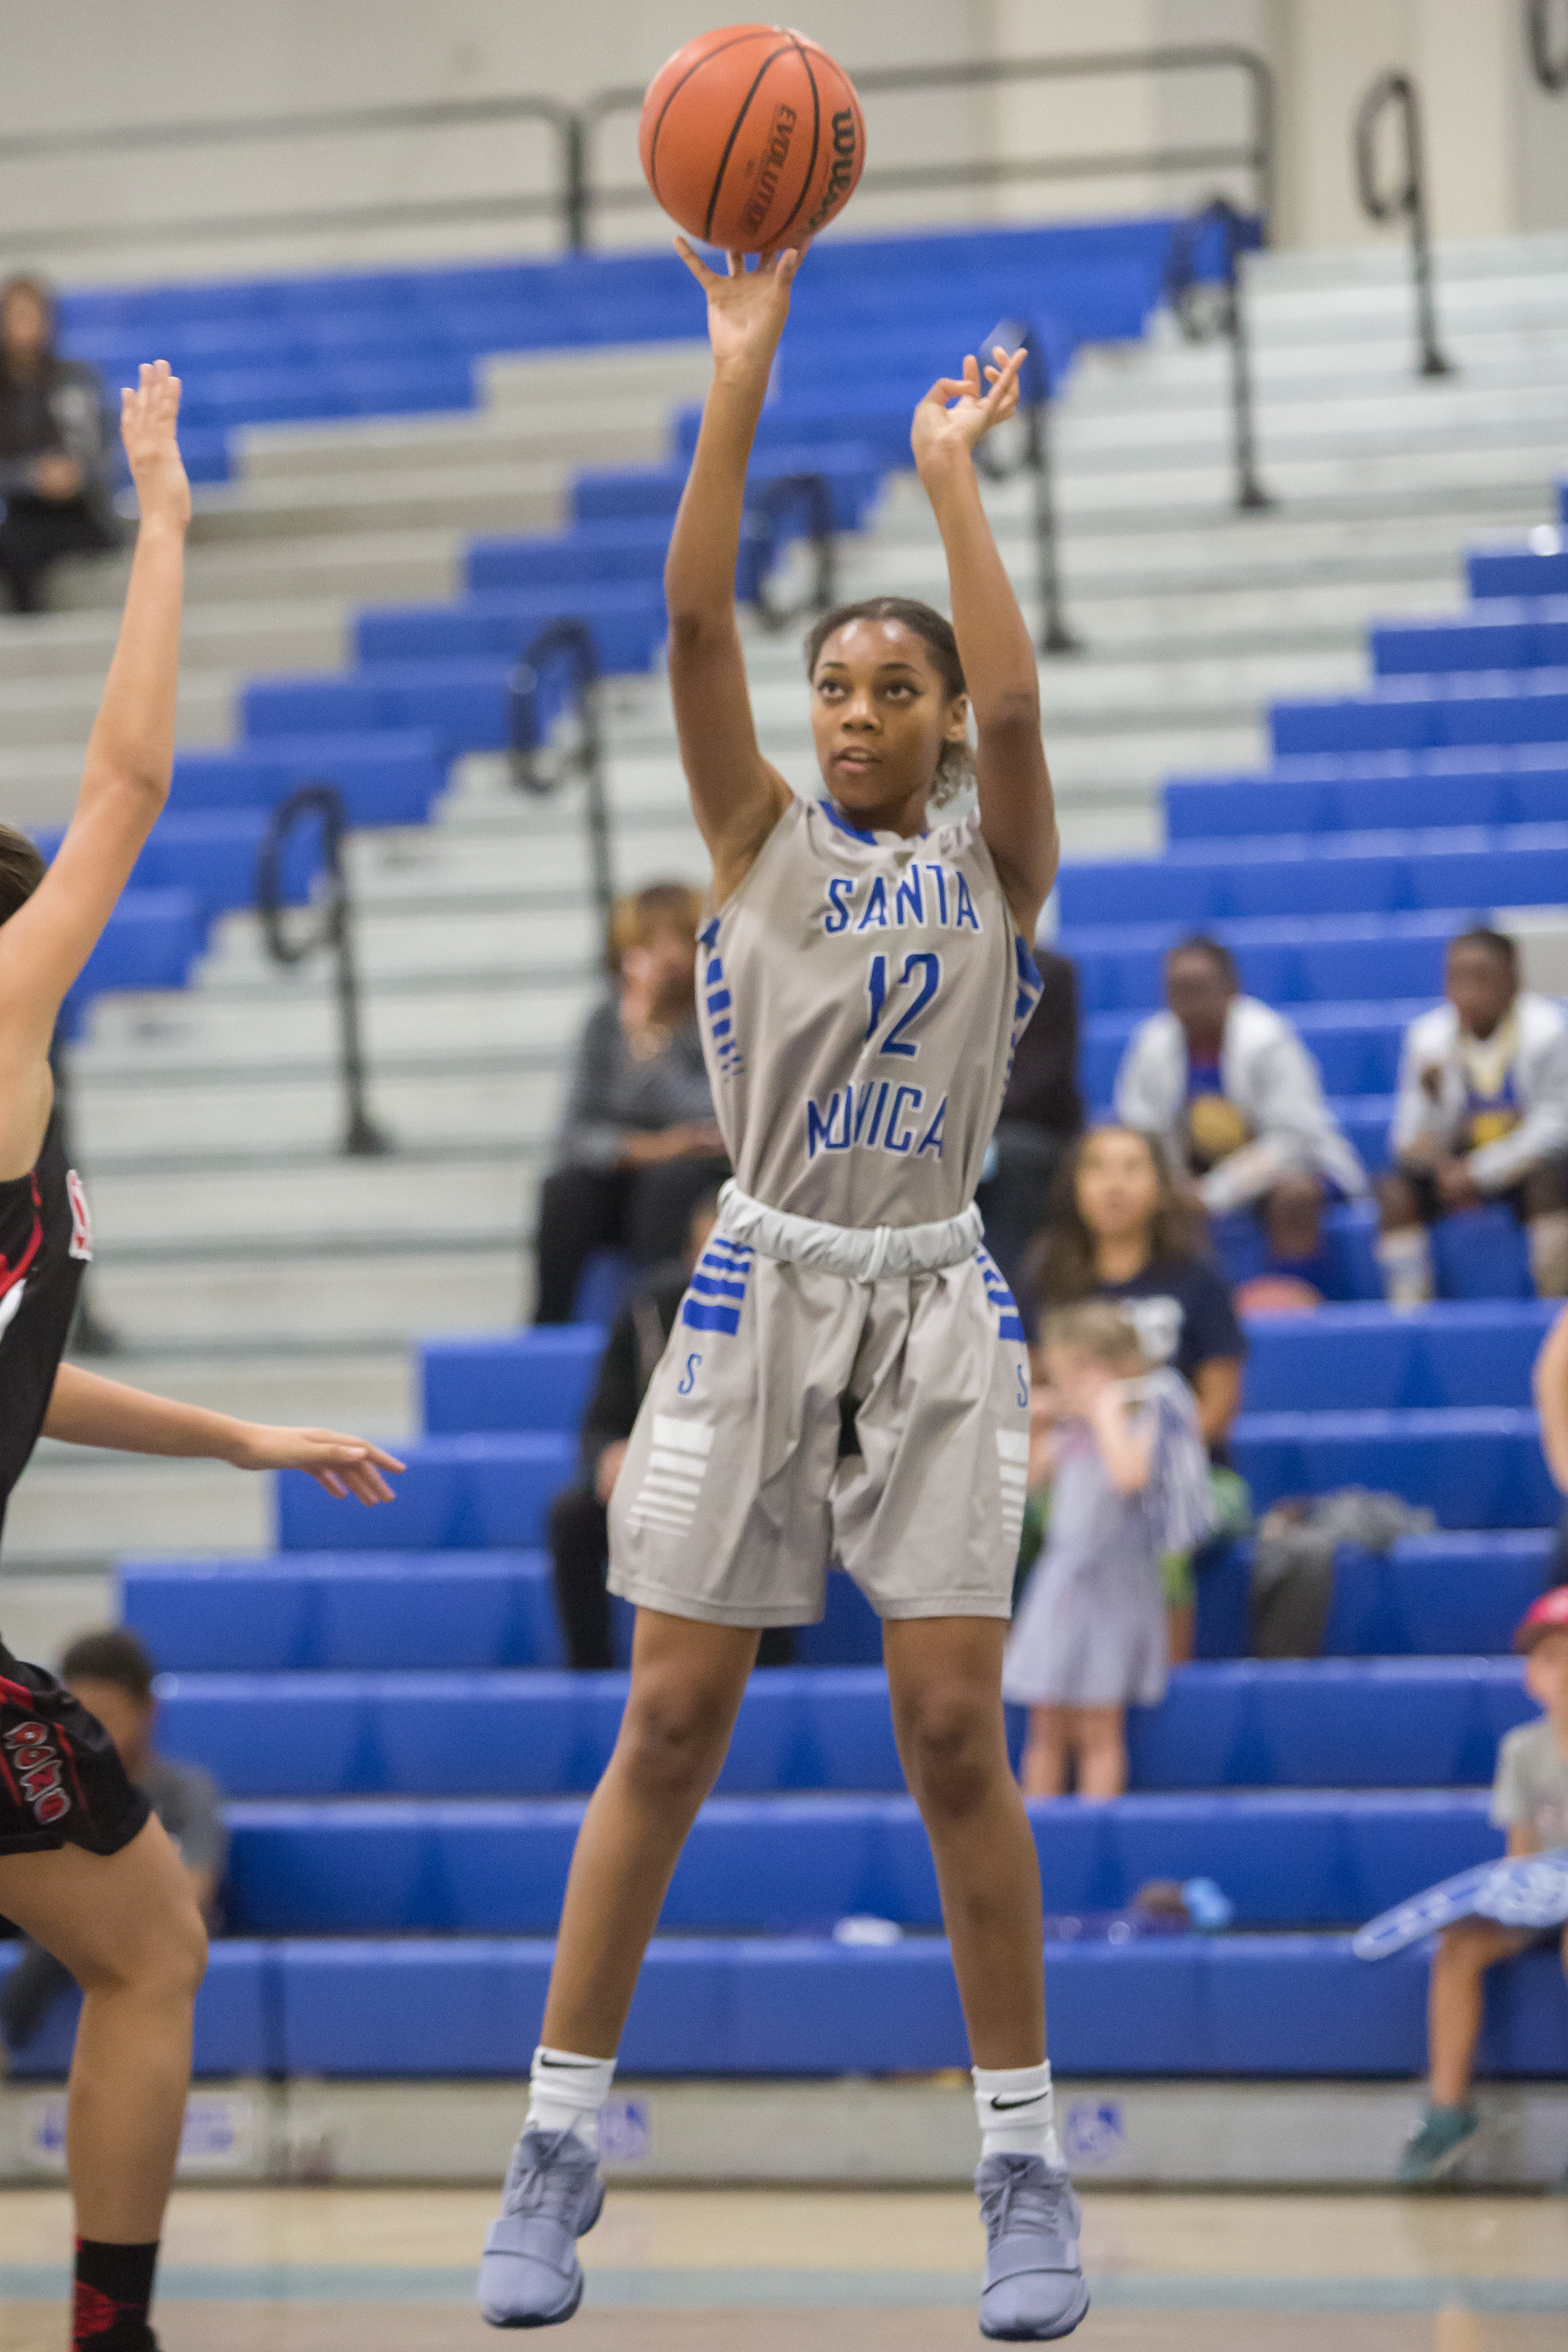  Forward Jazzmin Oddie (12) of Santa Monica College Corsairs shoots a three point attempt from the corner. Santa Monica College Corsairs win the game 63-54 against Santa Ana College. On Saturday, November 4th, 2017 at the SMC Pavilion on the Santa Mo